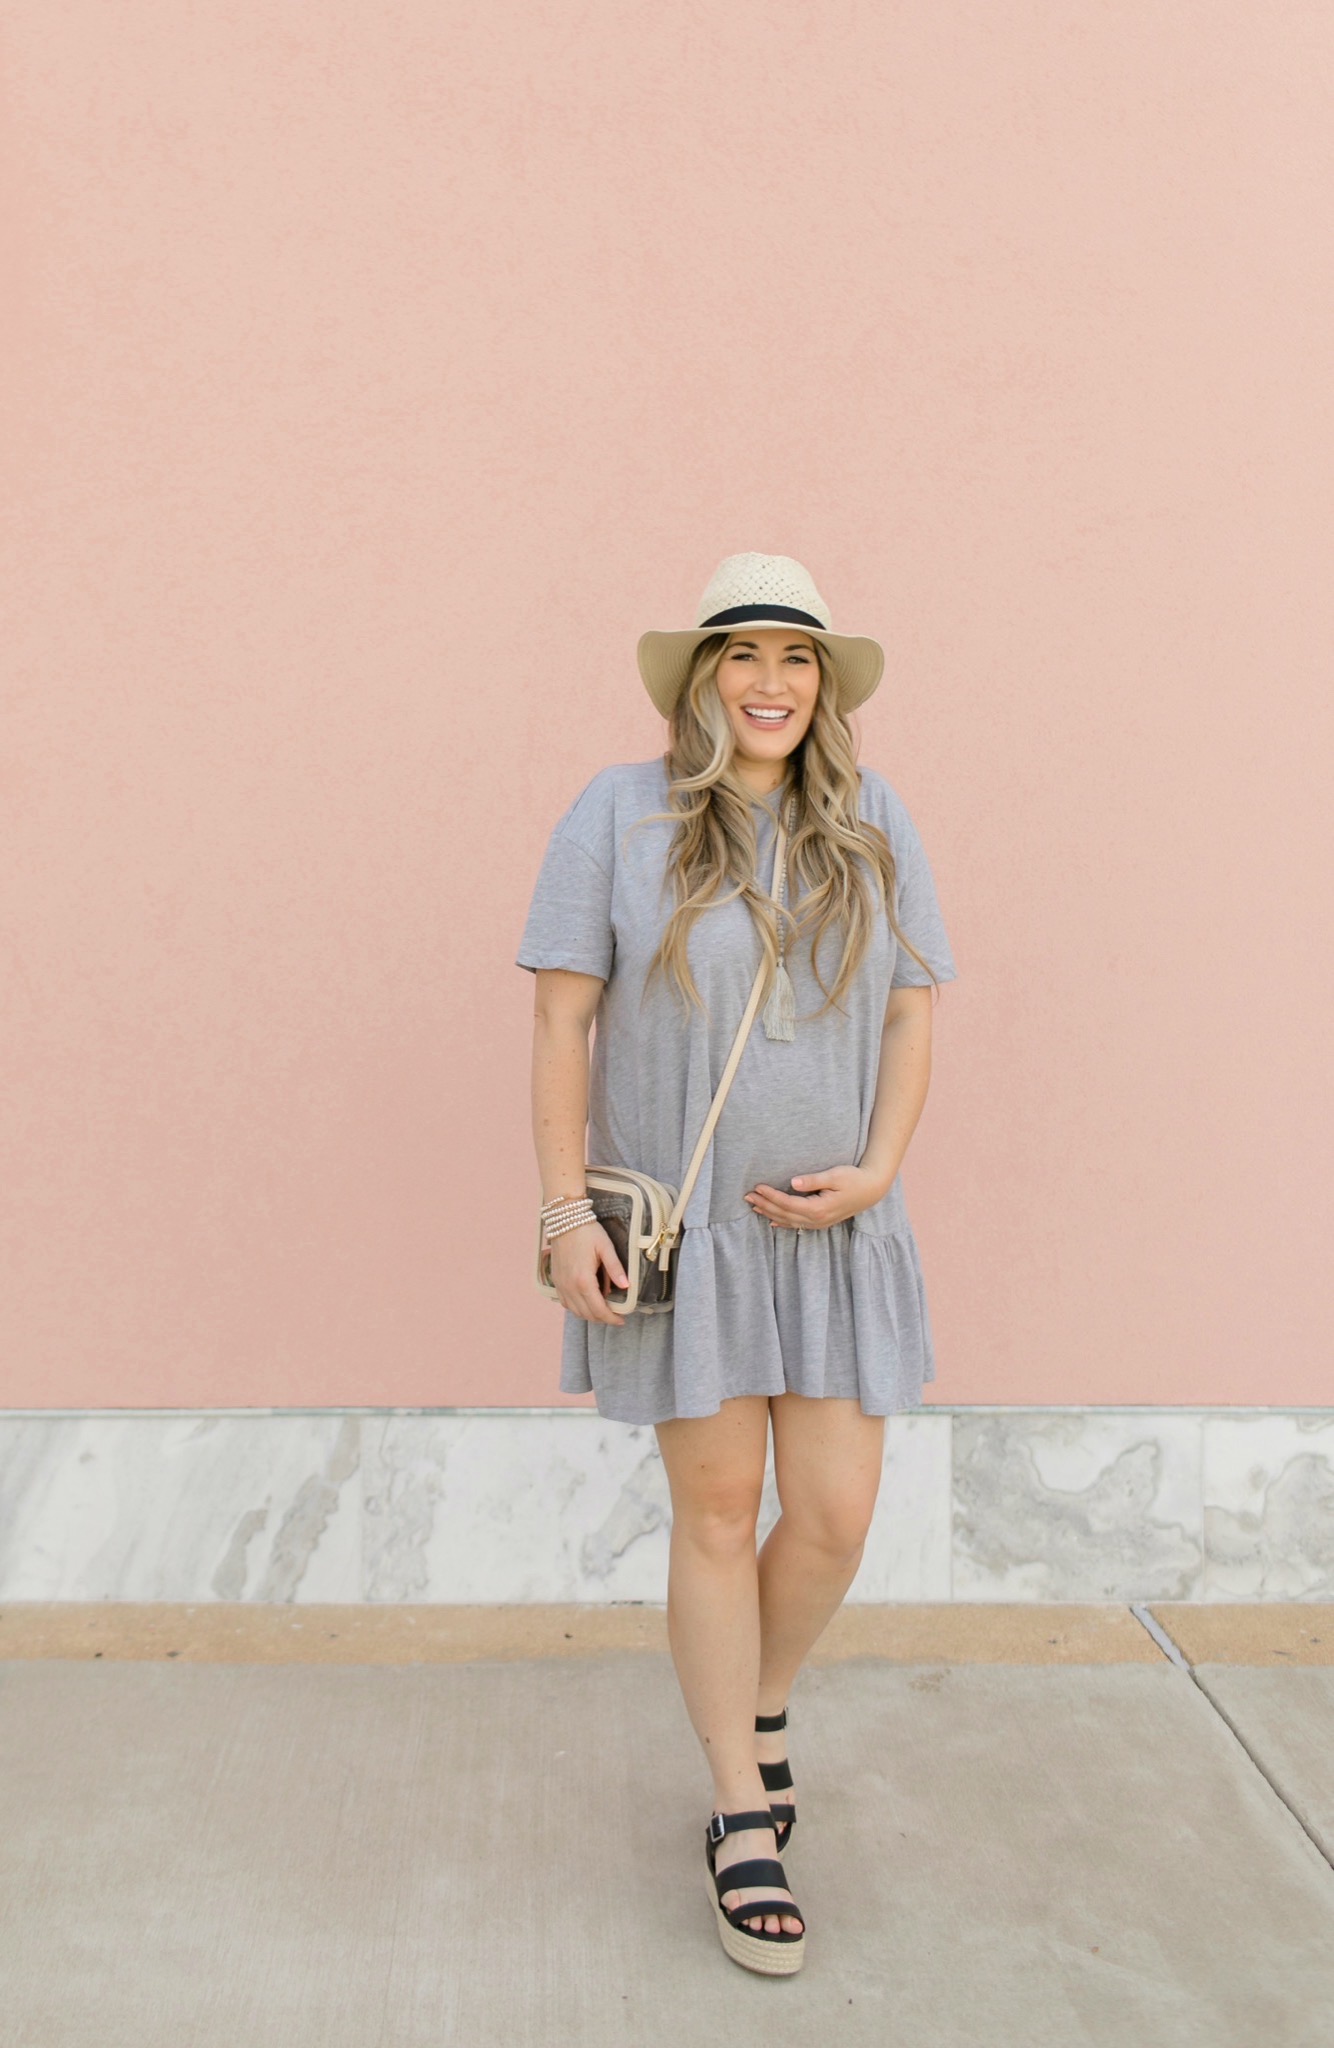 Casual maternity look feature dby top Memphis fashion blogger, Walking in Memphis in High Heels: image of a pregnant woman wearing a Nasty Gal striped tee shirt mini dress, Valett strap sandals, and a Gigi NewYork Collins Crossbody